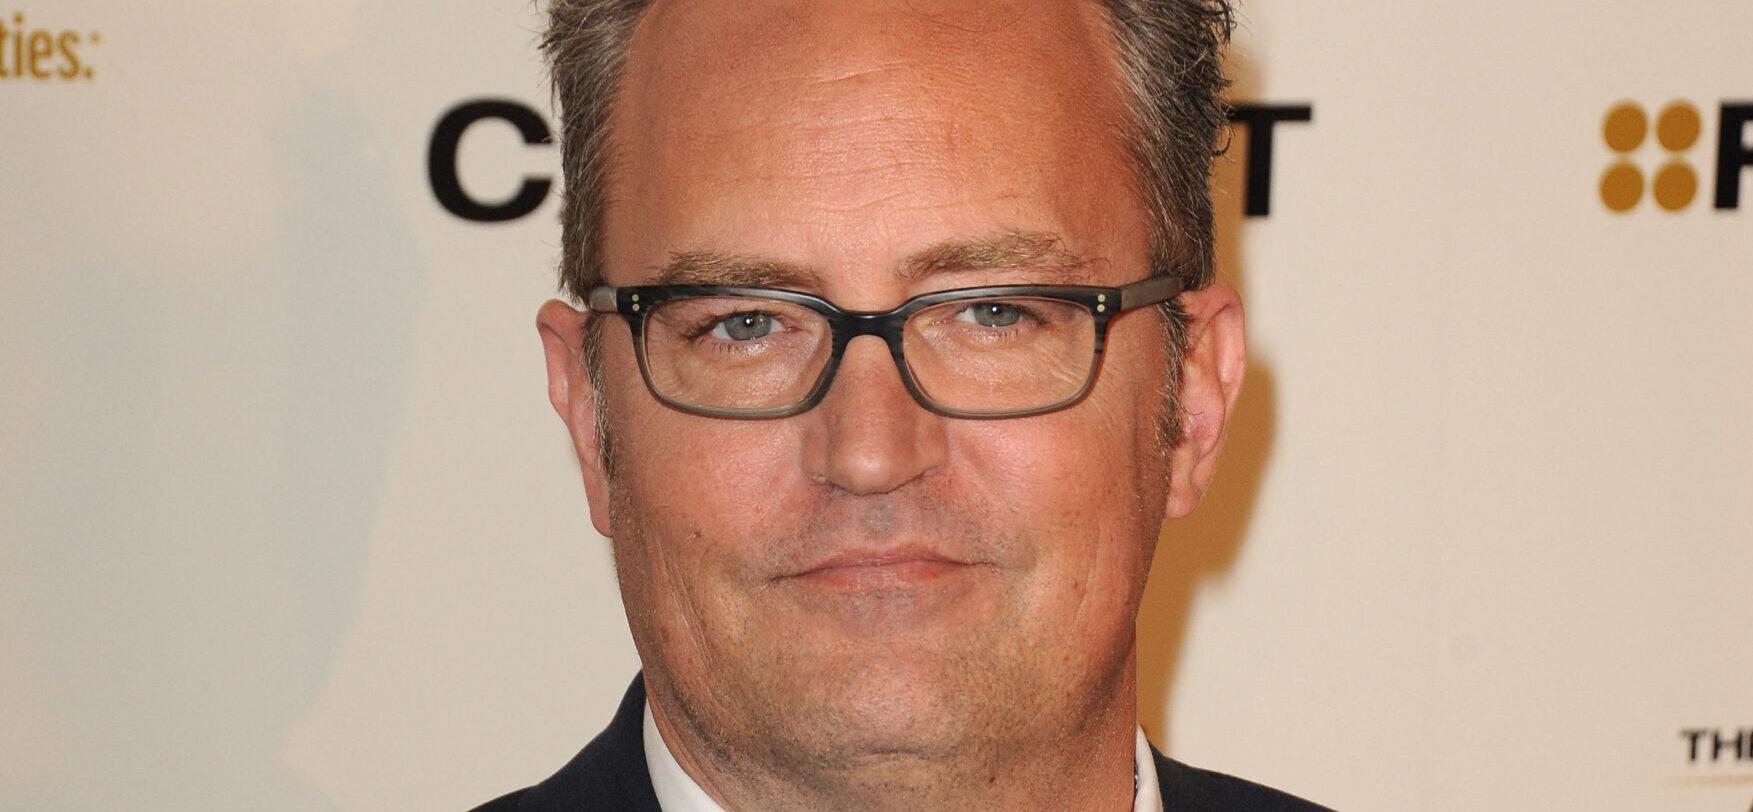 Matthew Perry smiling while wearing glasses